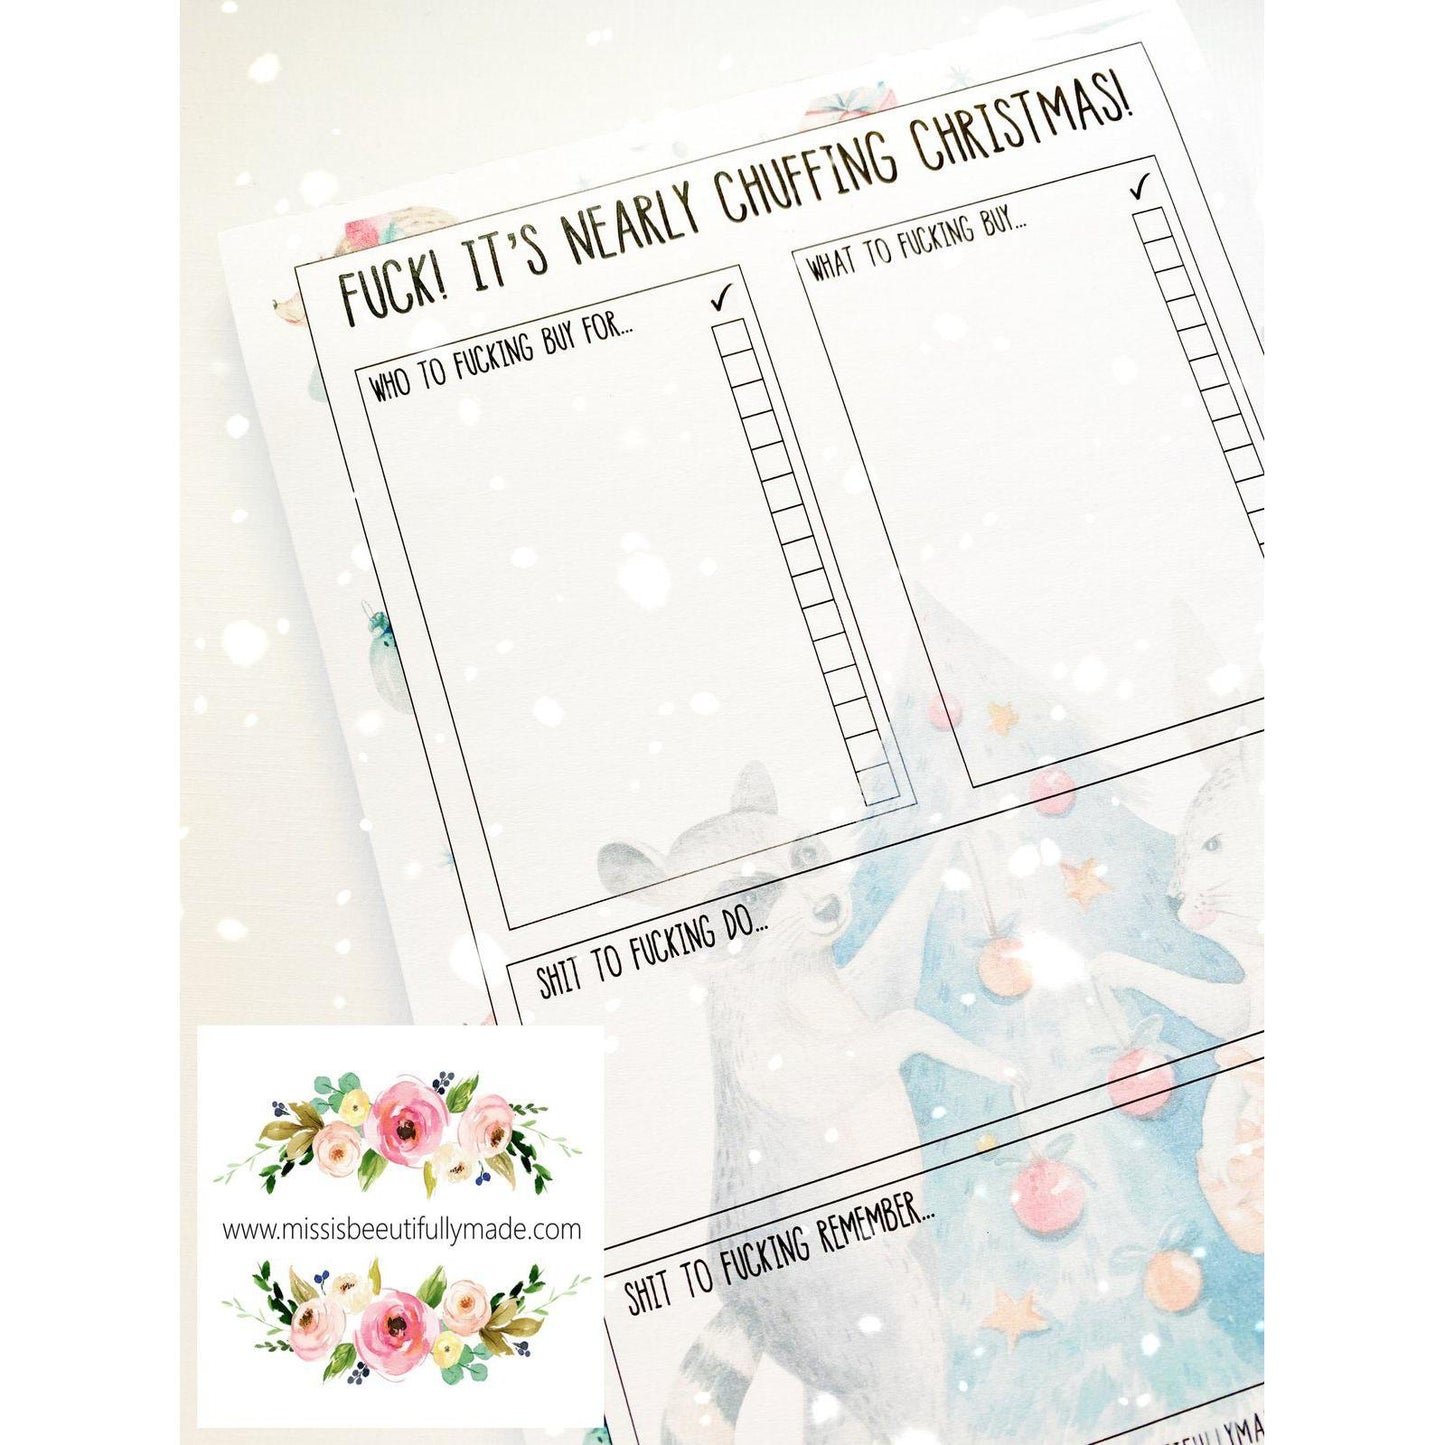 Christmas Notepad - It’s nearly chuffing Christmas